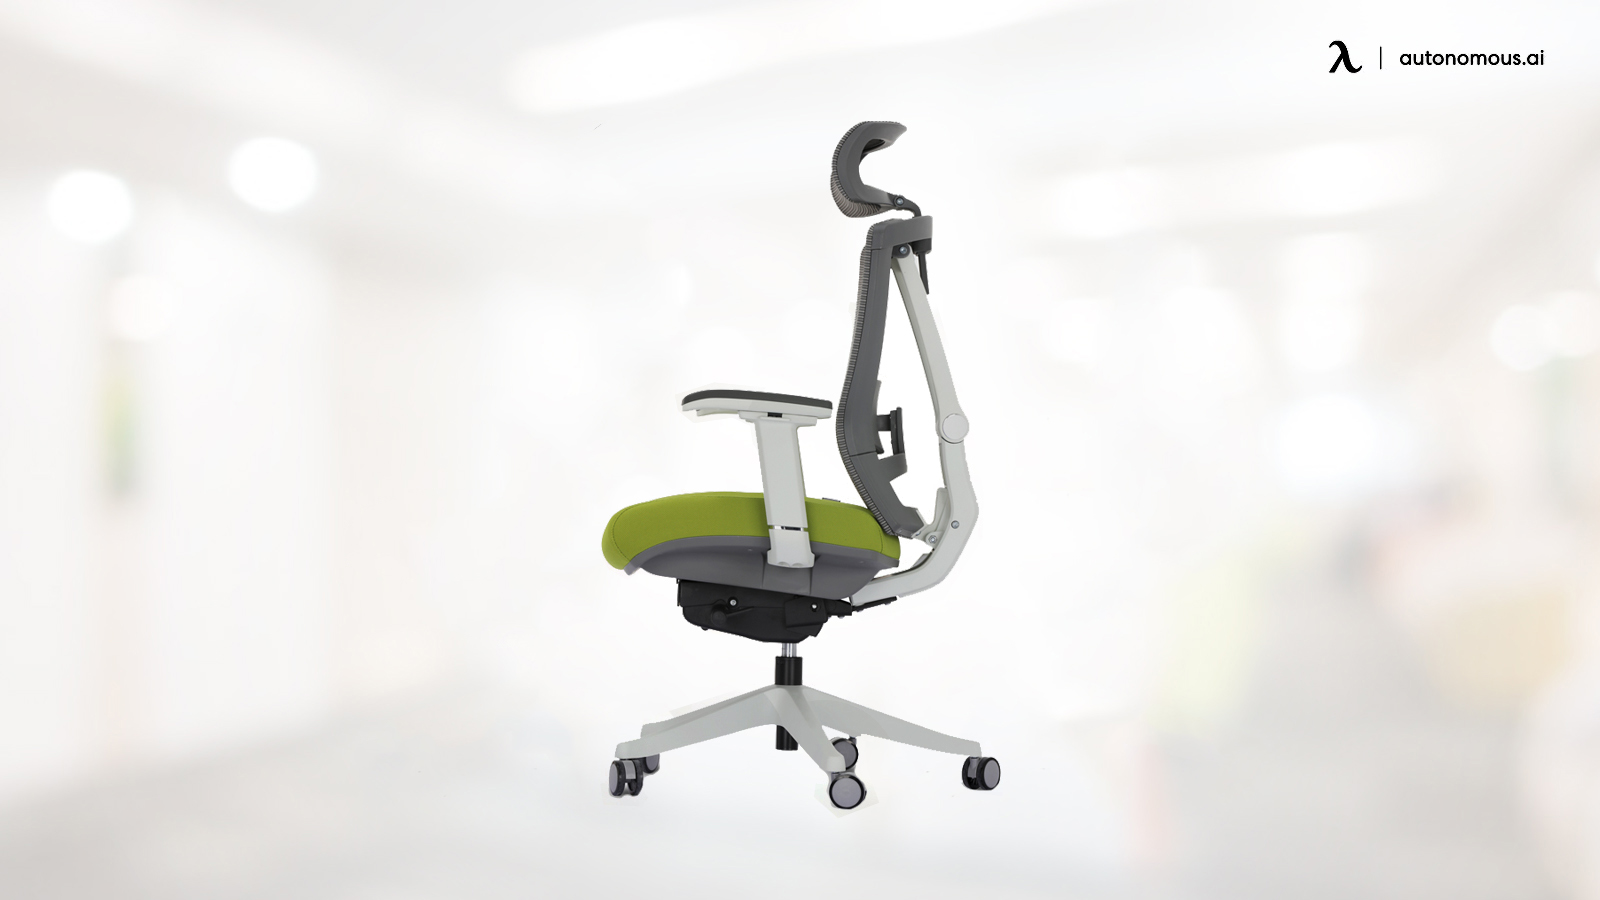 Should You Choose an Armed or Armless Office Chair?